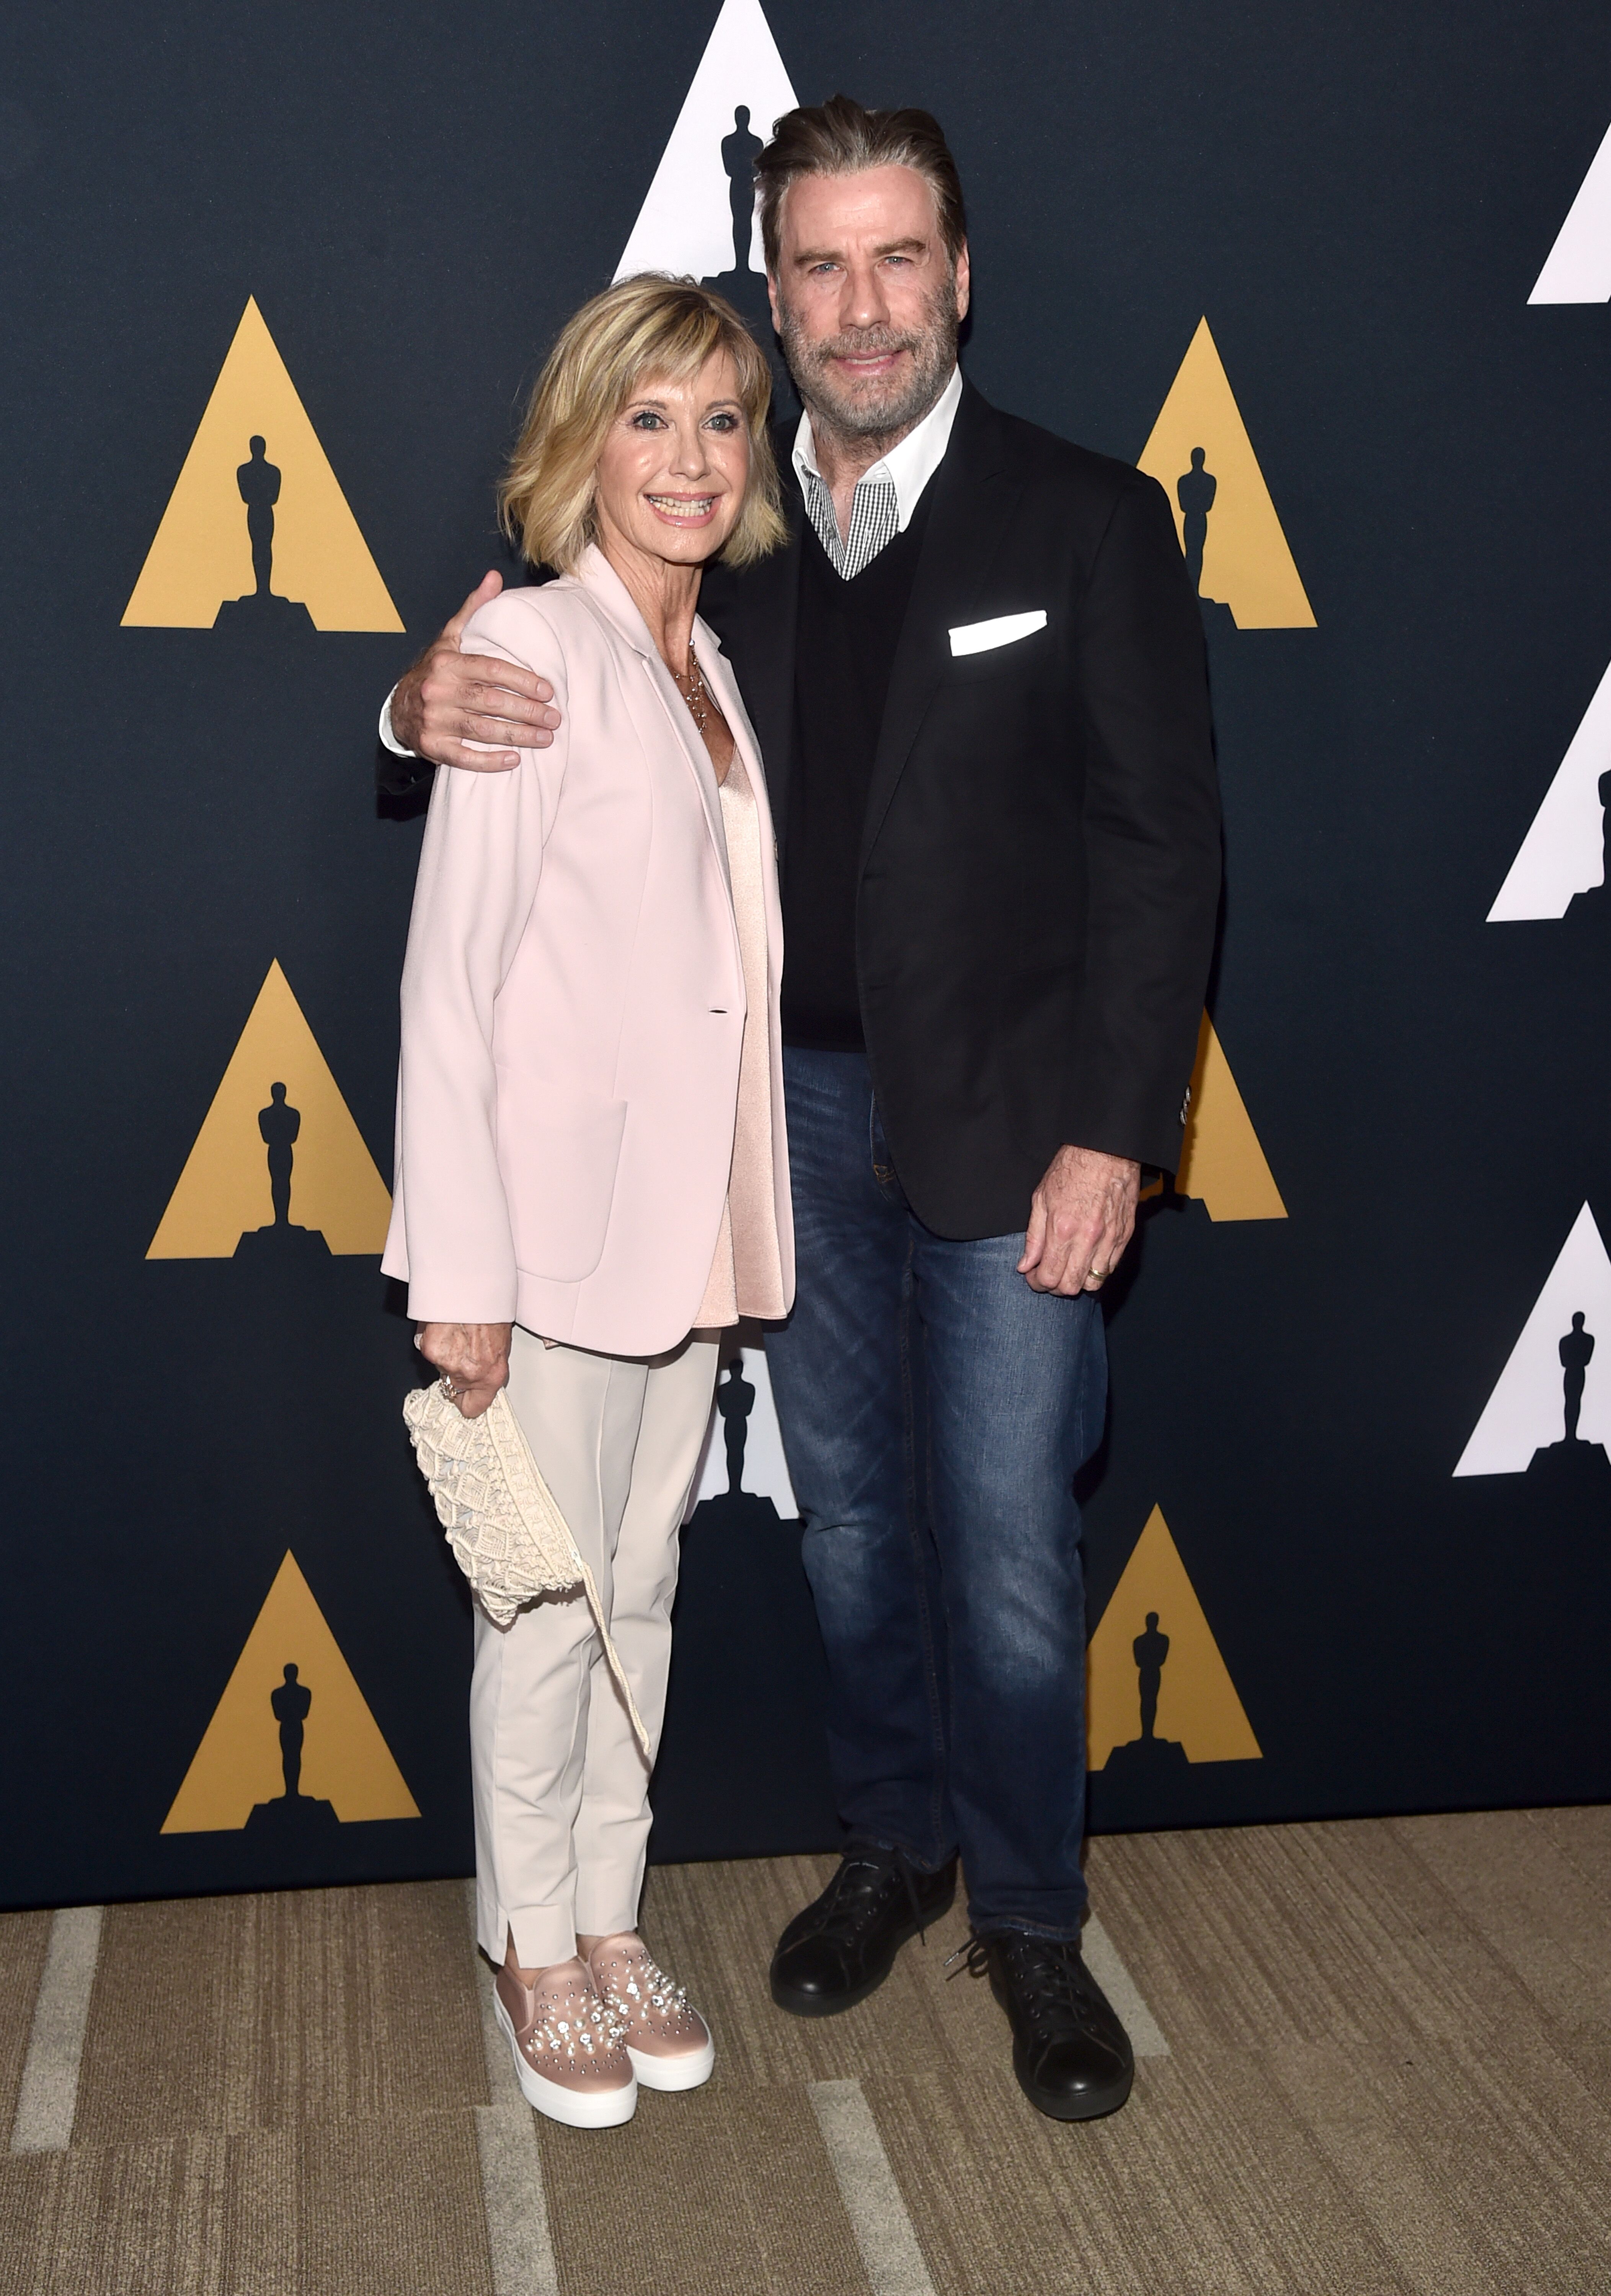 Olivia Newton-John and John Travolta at the "Grease" 40th-anniversary screening on August 15, 2018, in Beverly Hills, California | Photo: Alberto E. Rodriguez/Getty Images